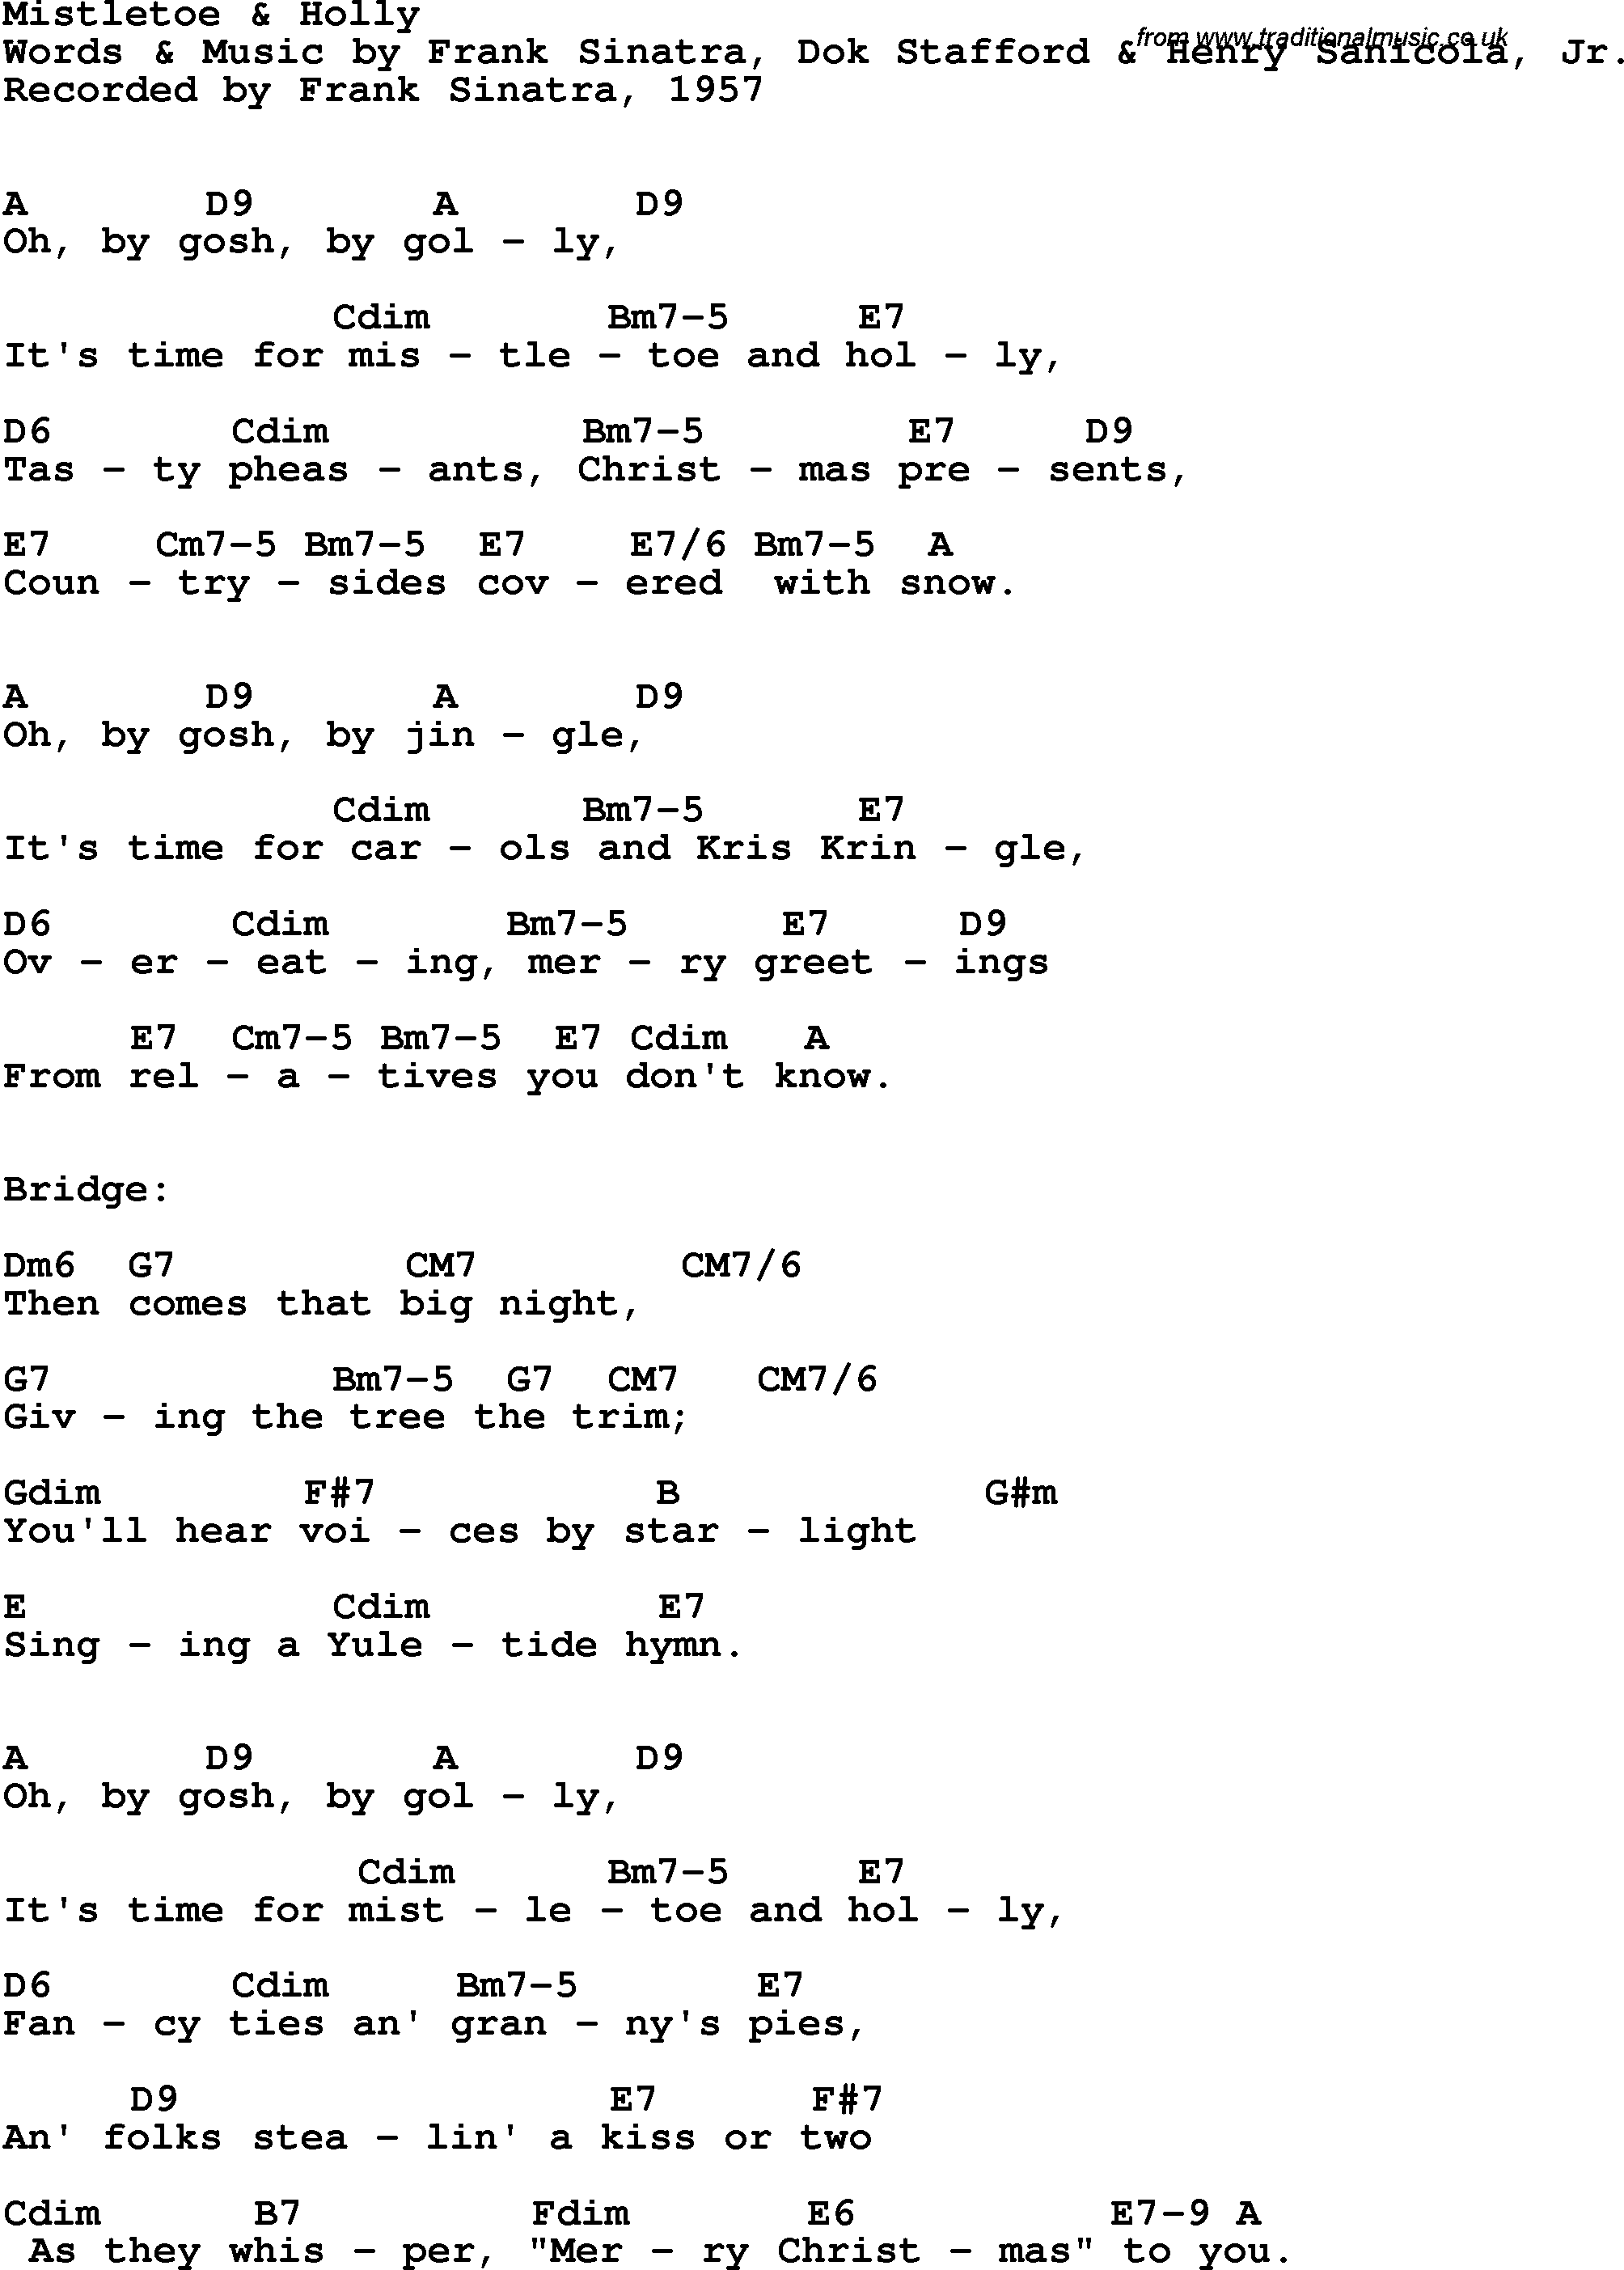 Song Lyrics with guitar chords for Mistletoe And Holly - Frank Sinatra, 1957